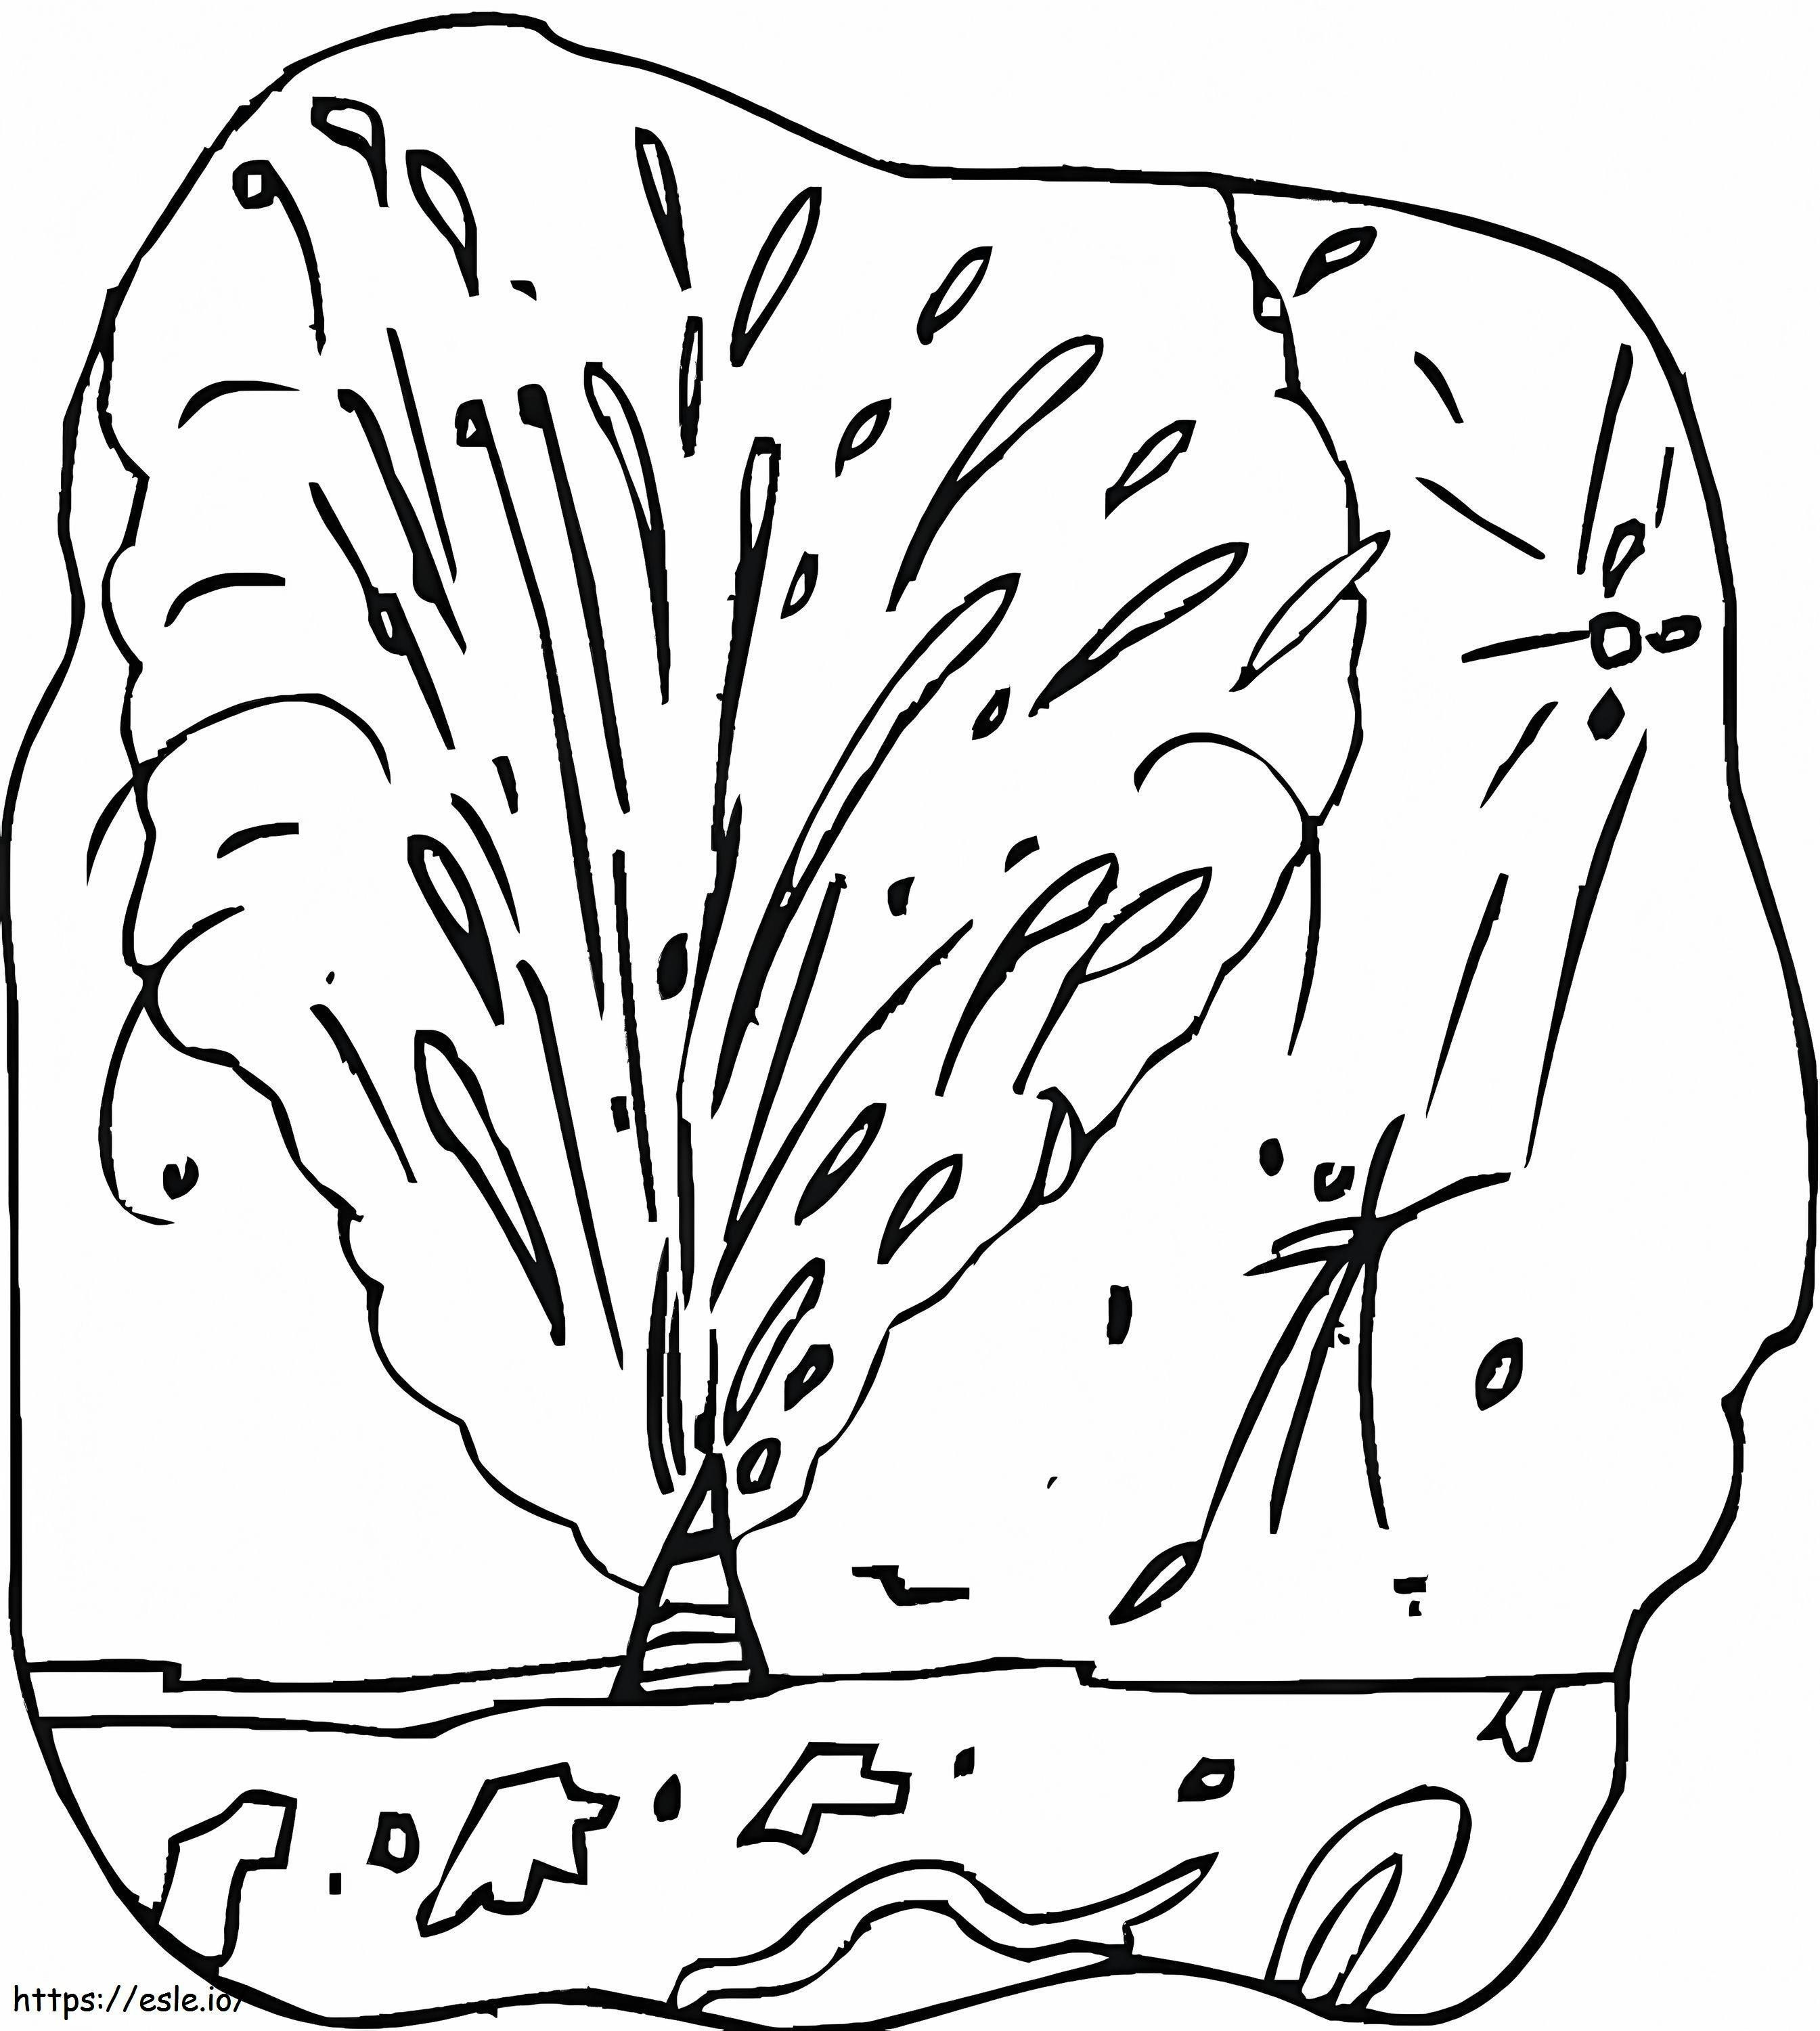 Prehistoric Fireworks coloring page